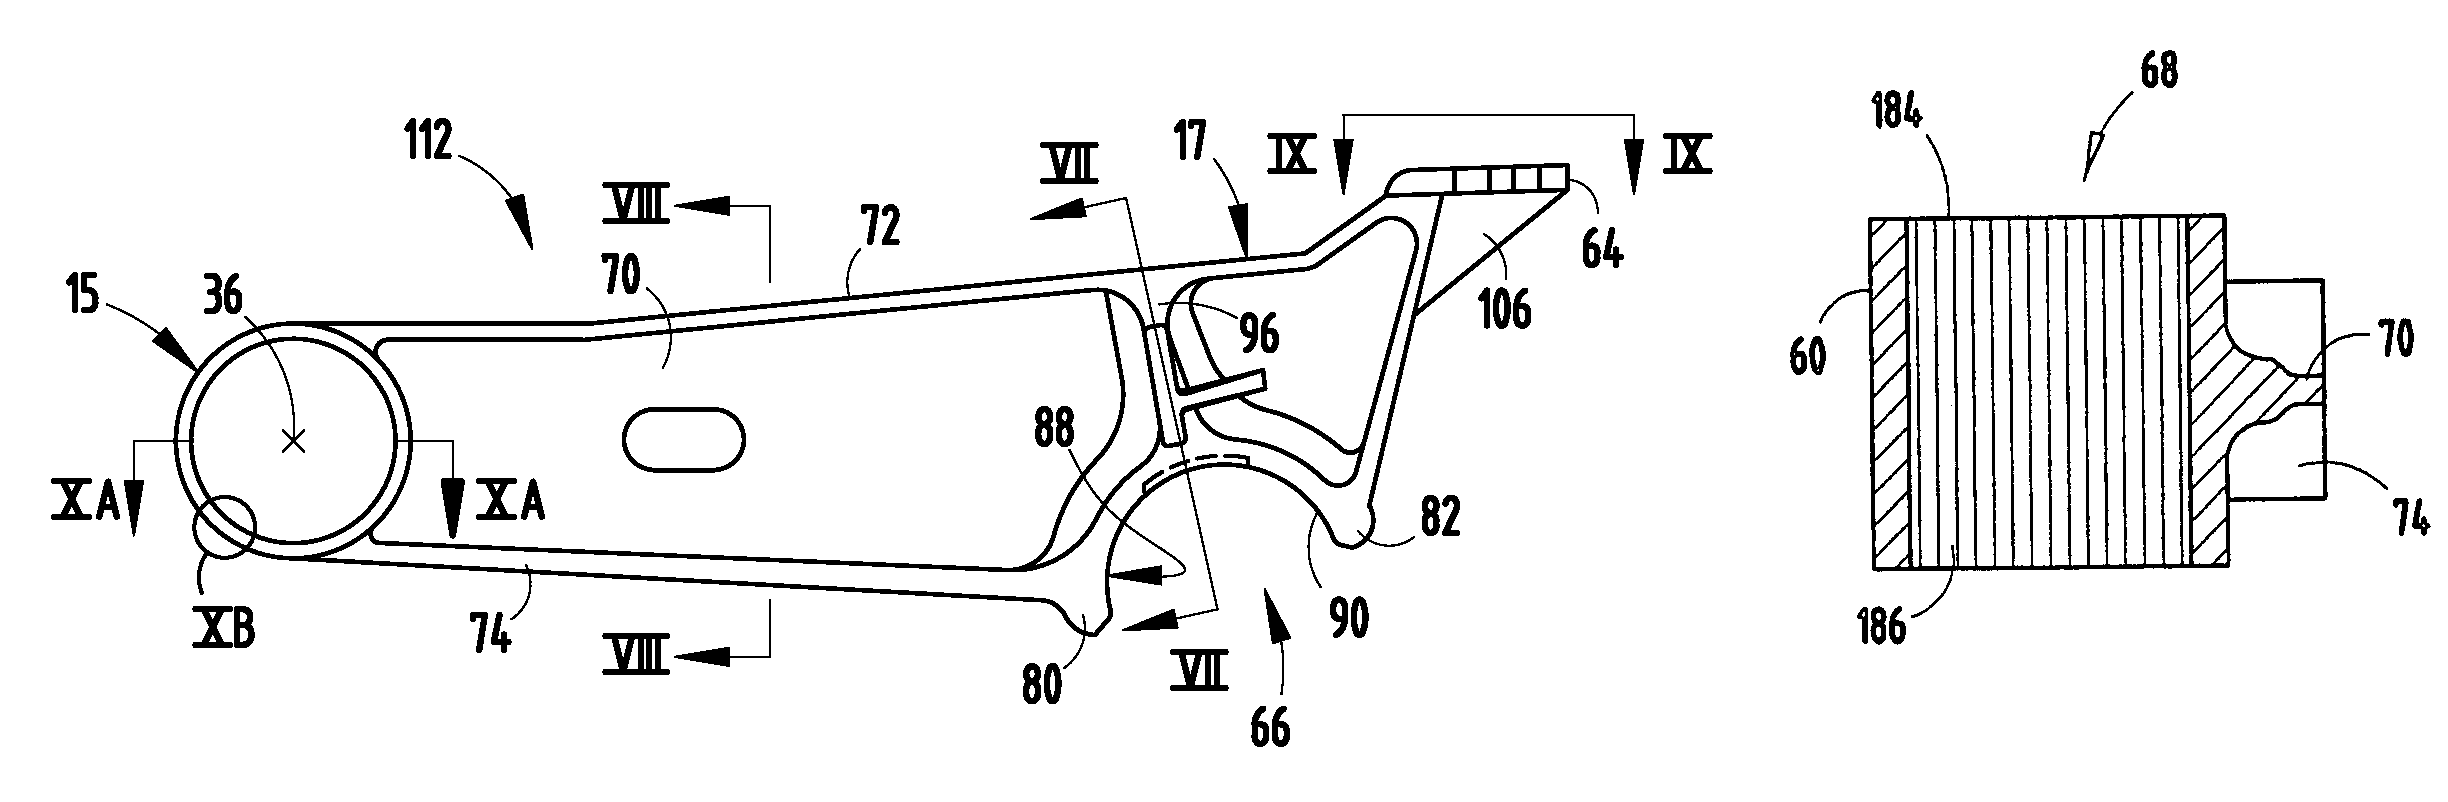 Trailing arm suspension with optimized I-beam